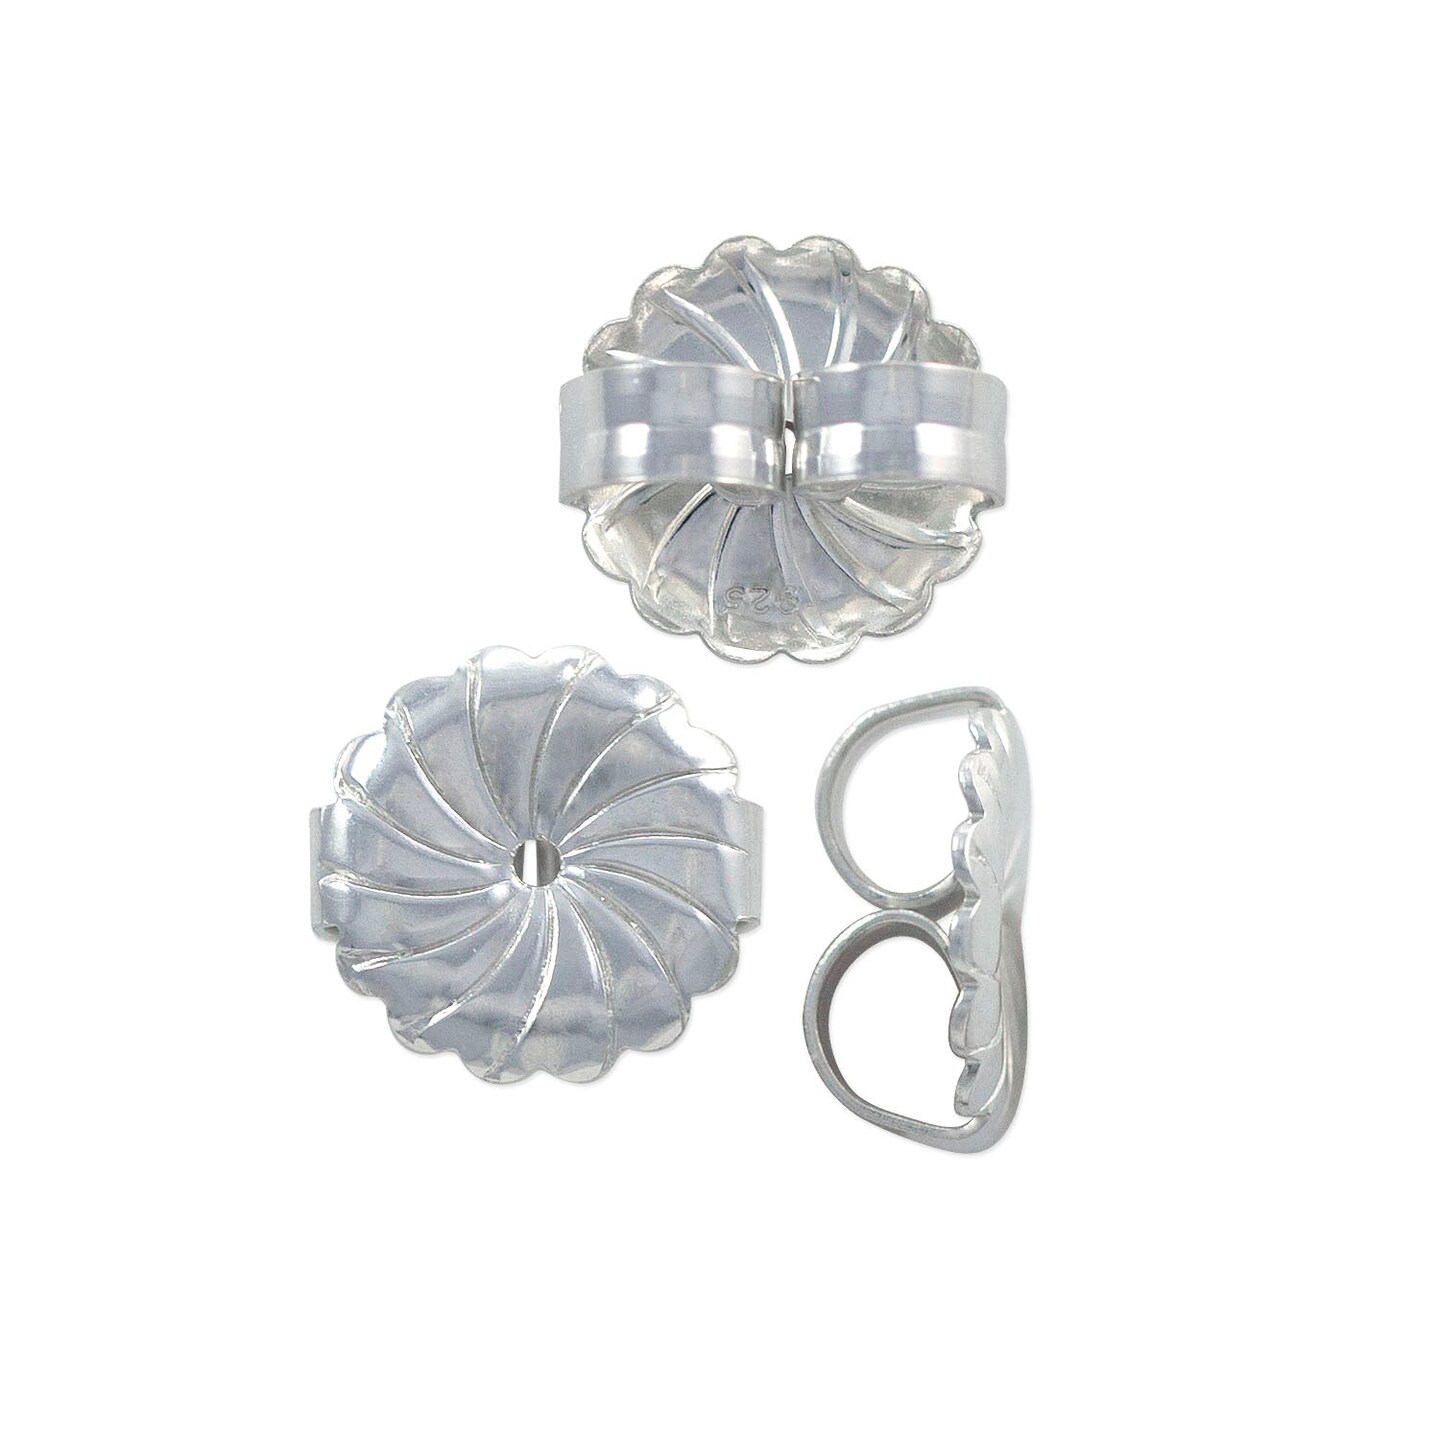 JewelrySupply Replacement Earring Backs Extra Heavy 9.5mm Sterling